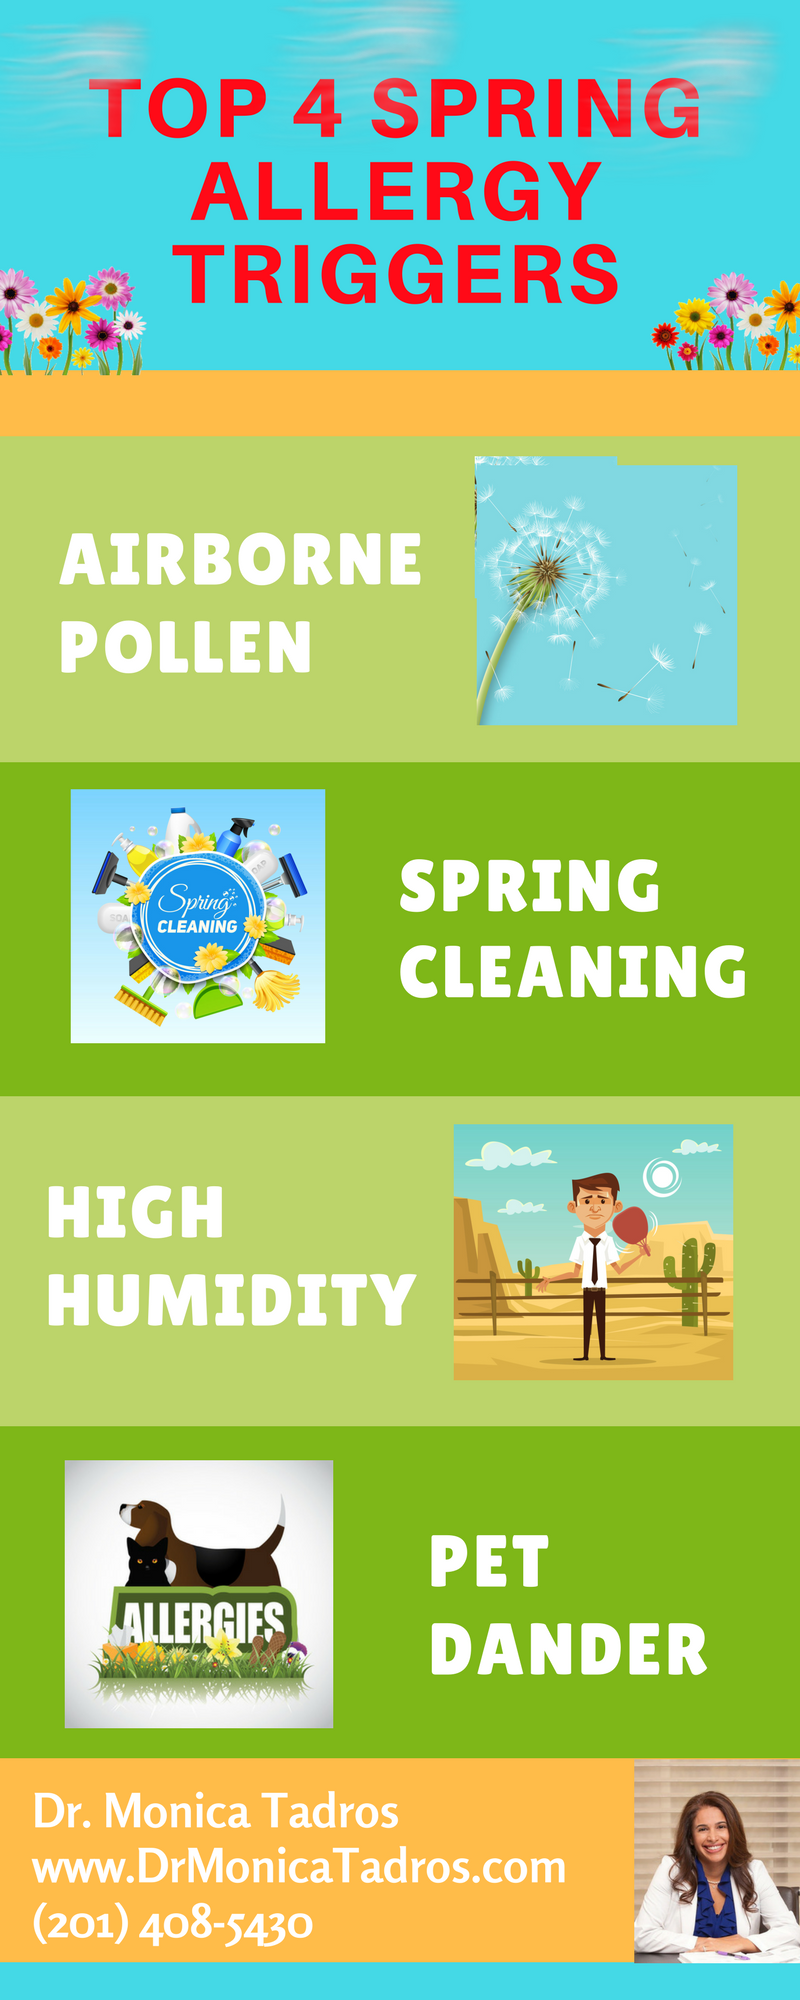 top-4-spring-allergy-triggers-infographic-dr-tadros-full